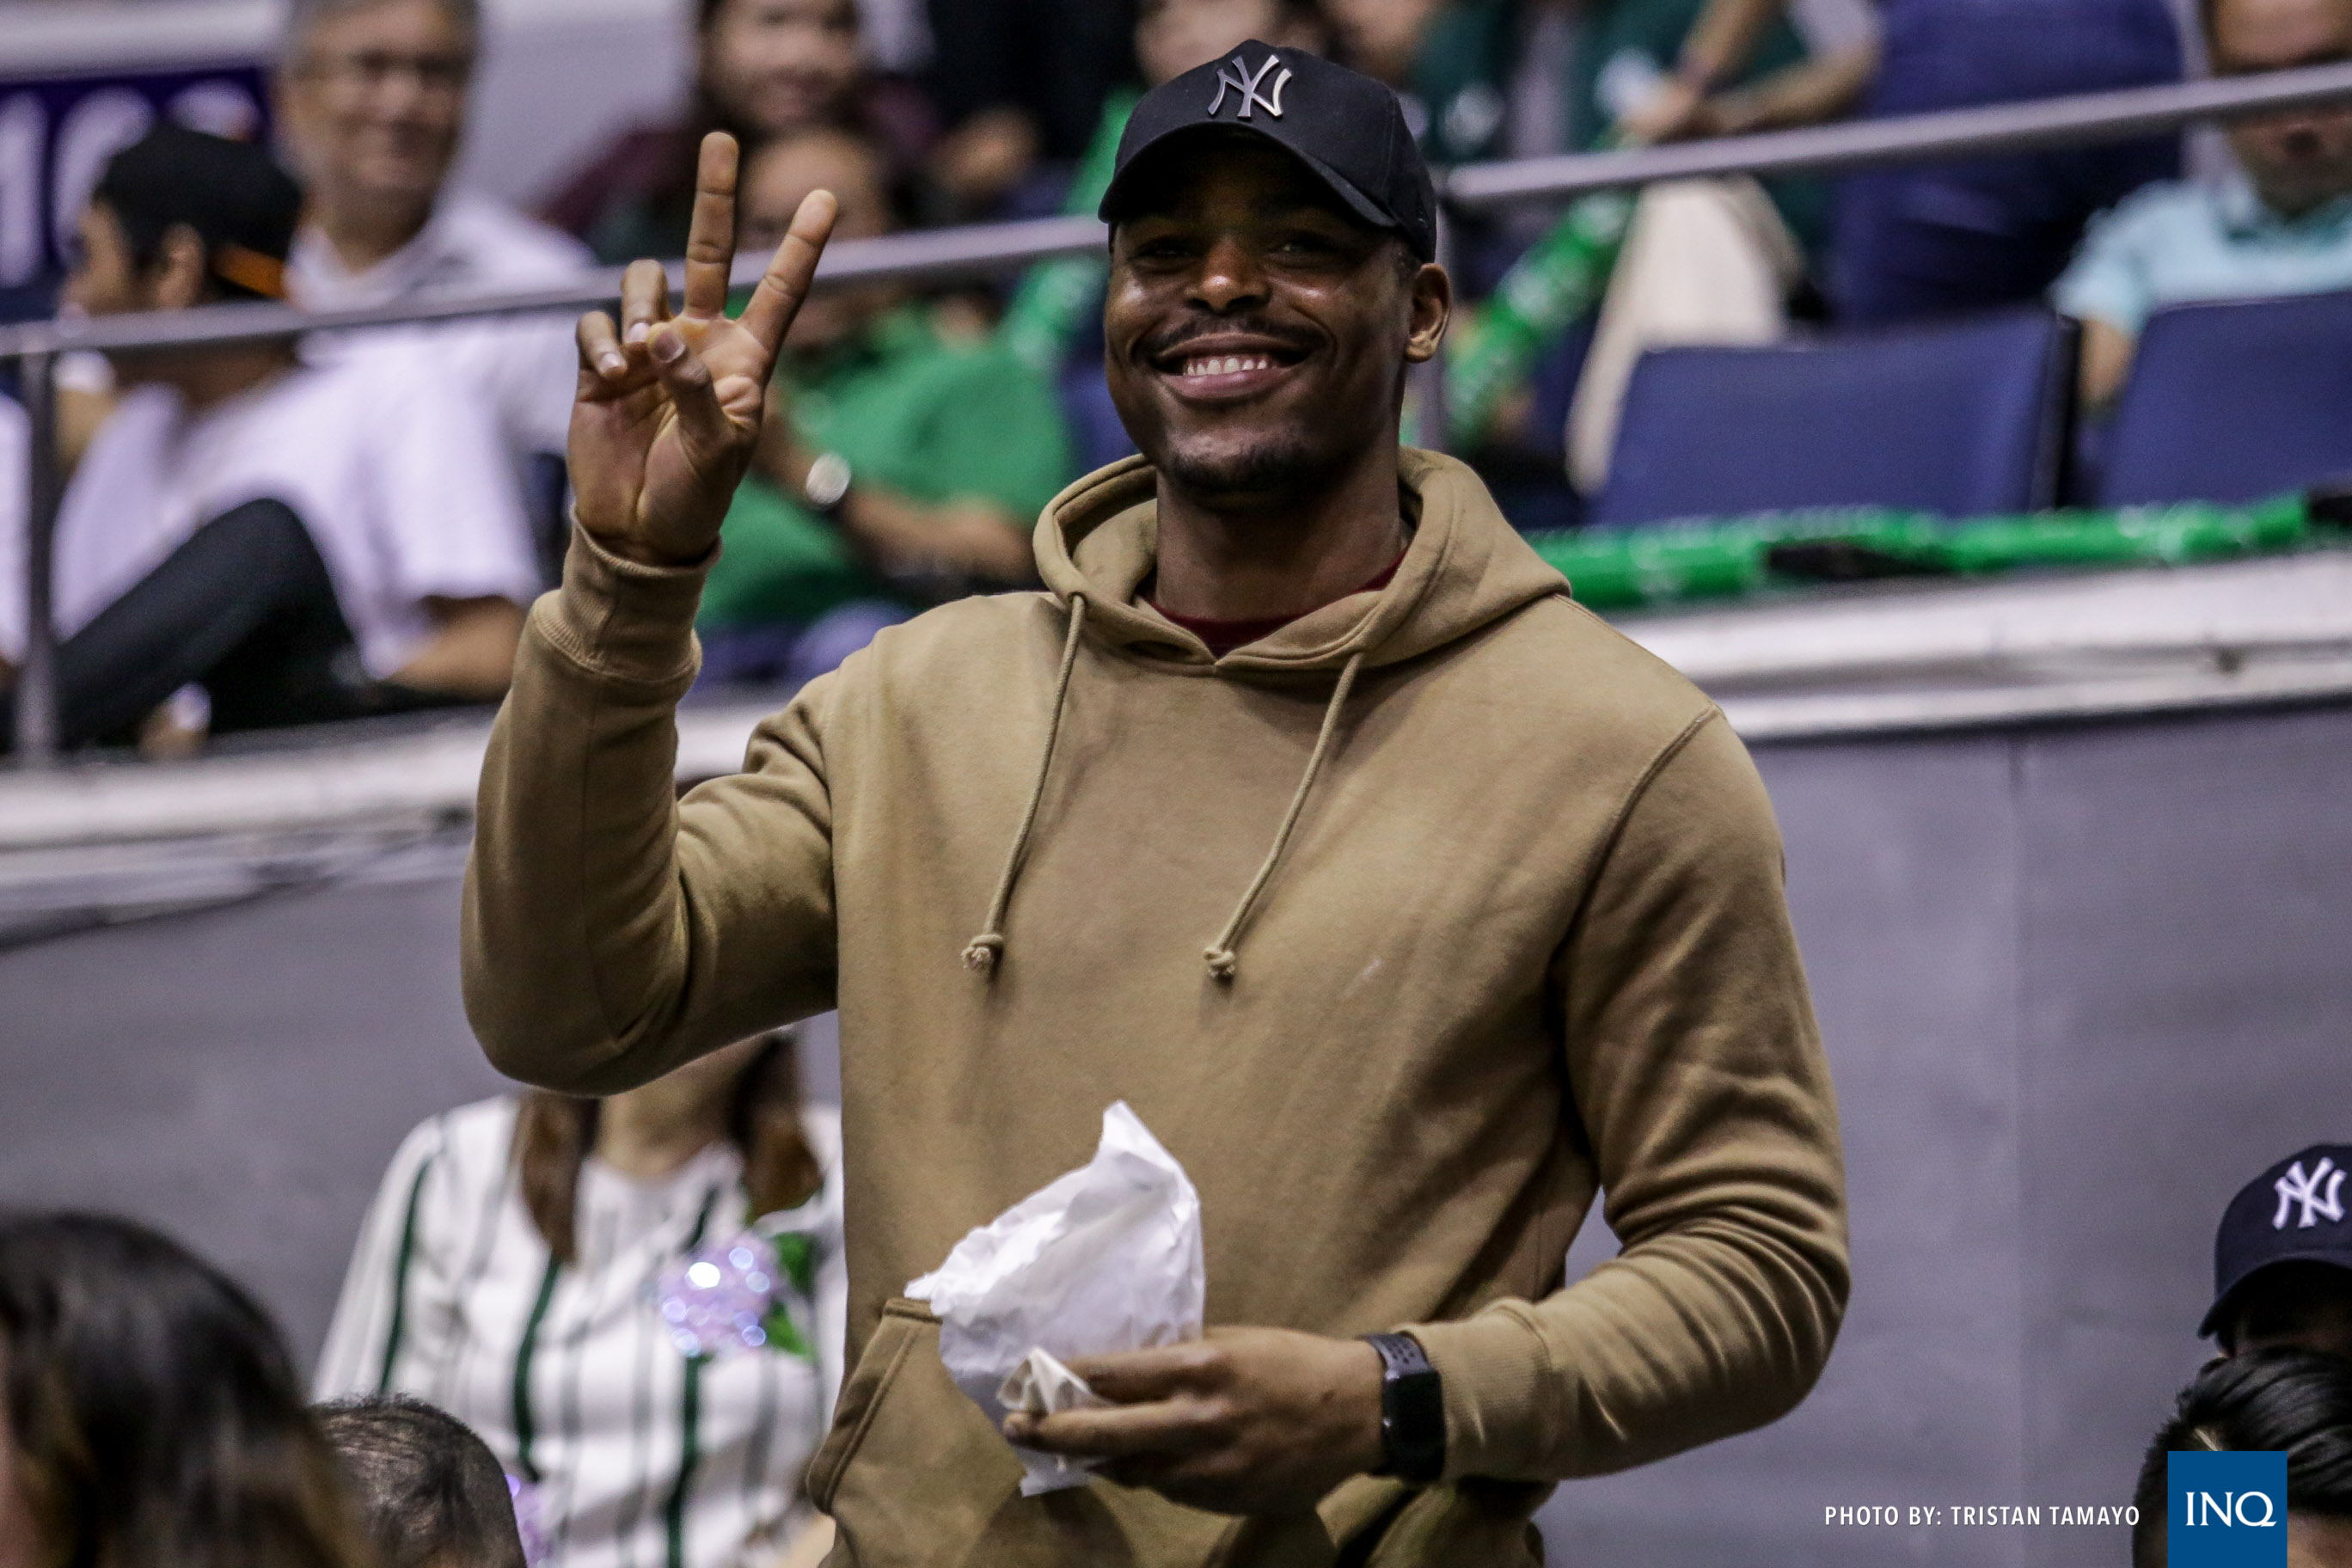 Ben Mbala shows up to support La Salle but watches as former team falls ...